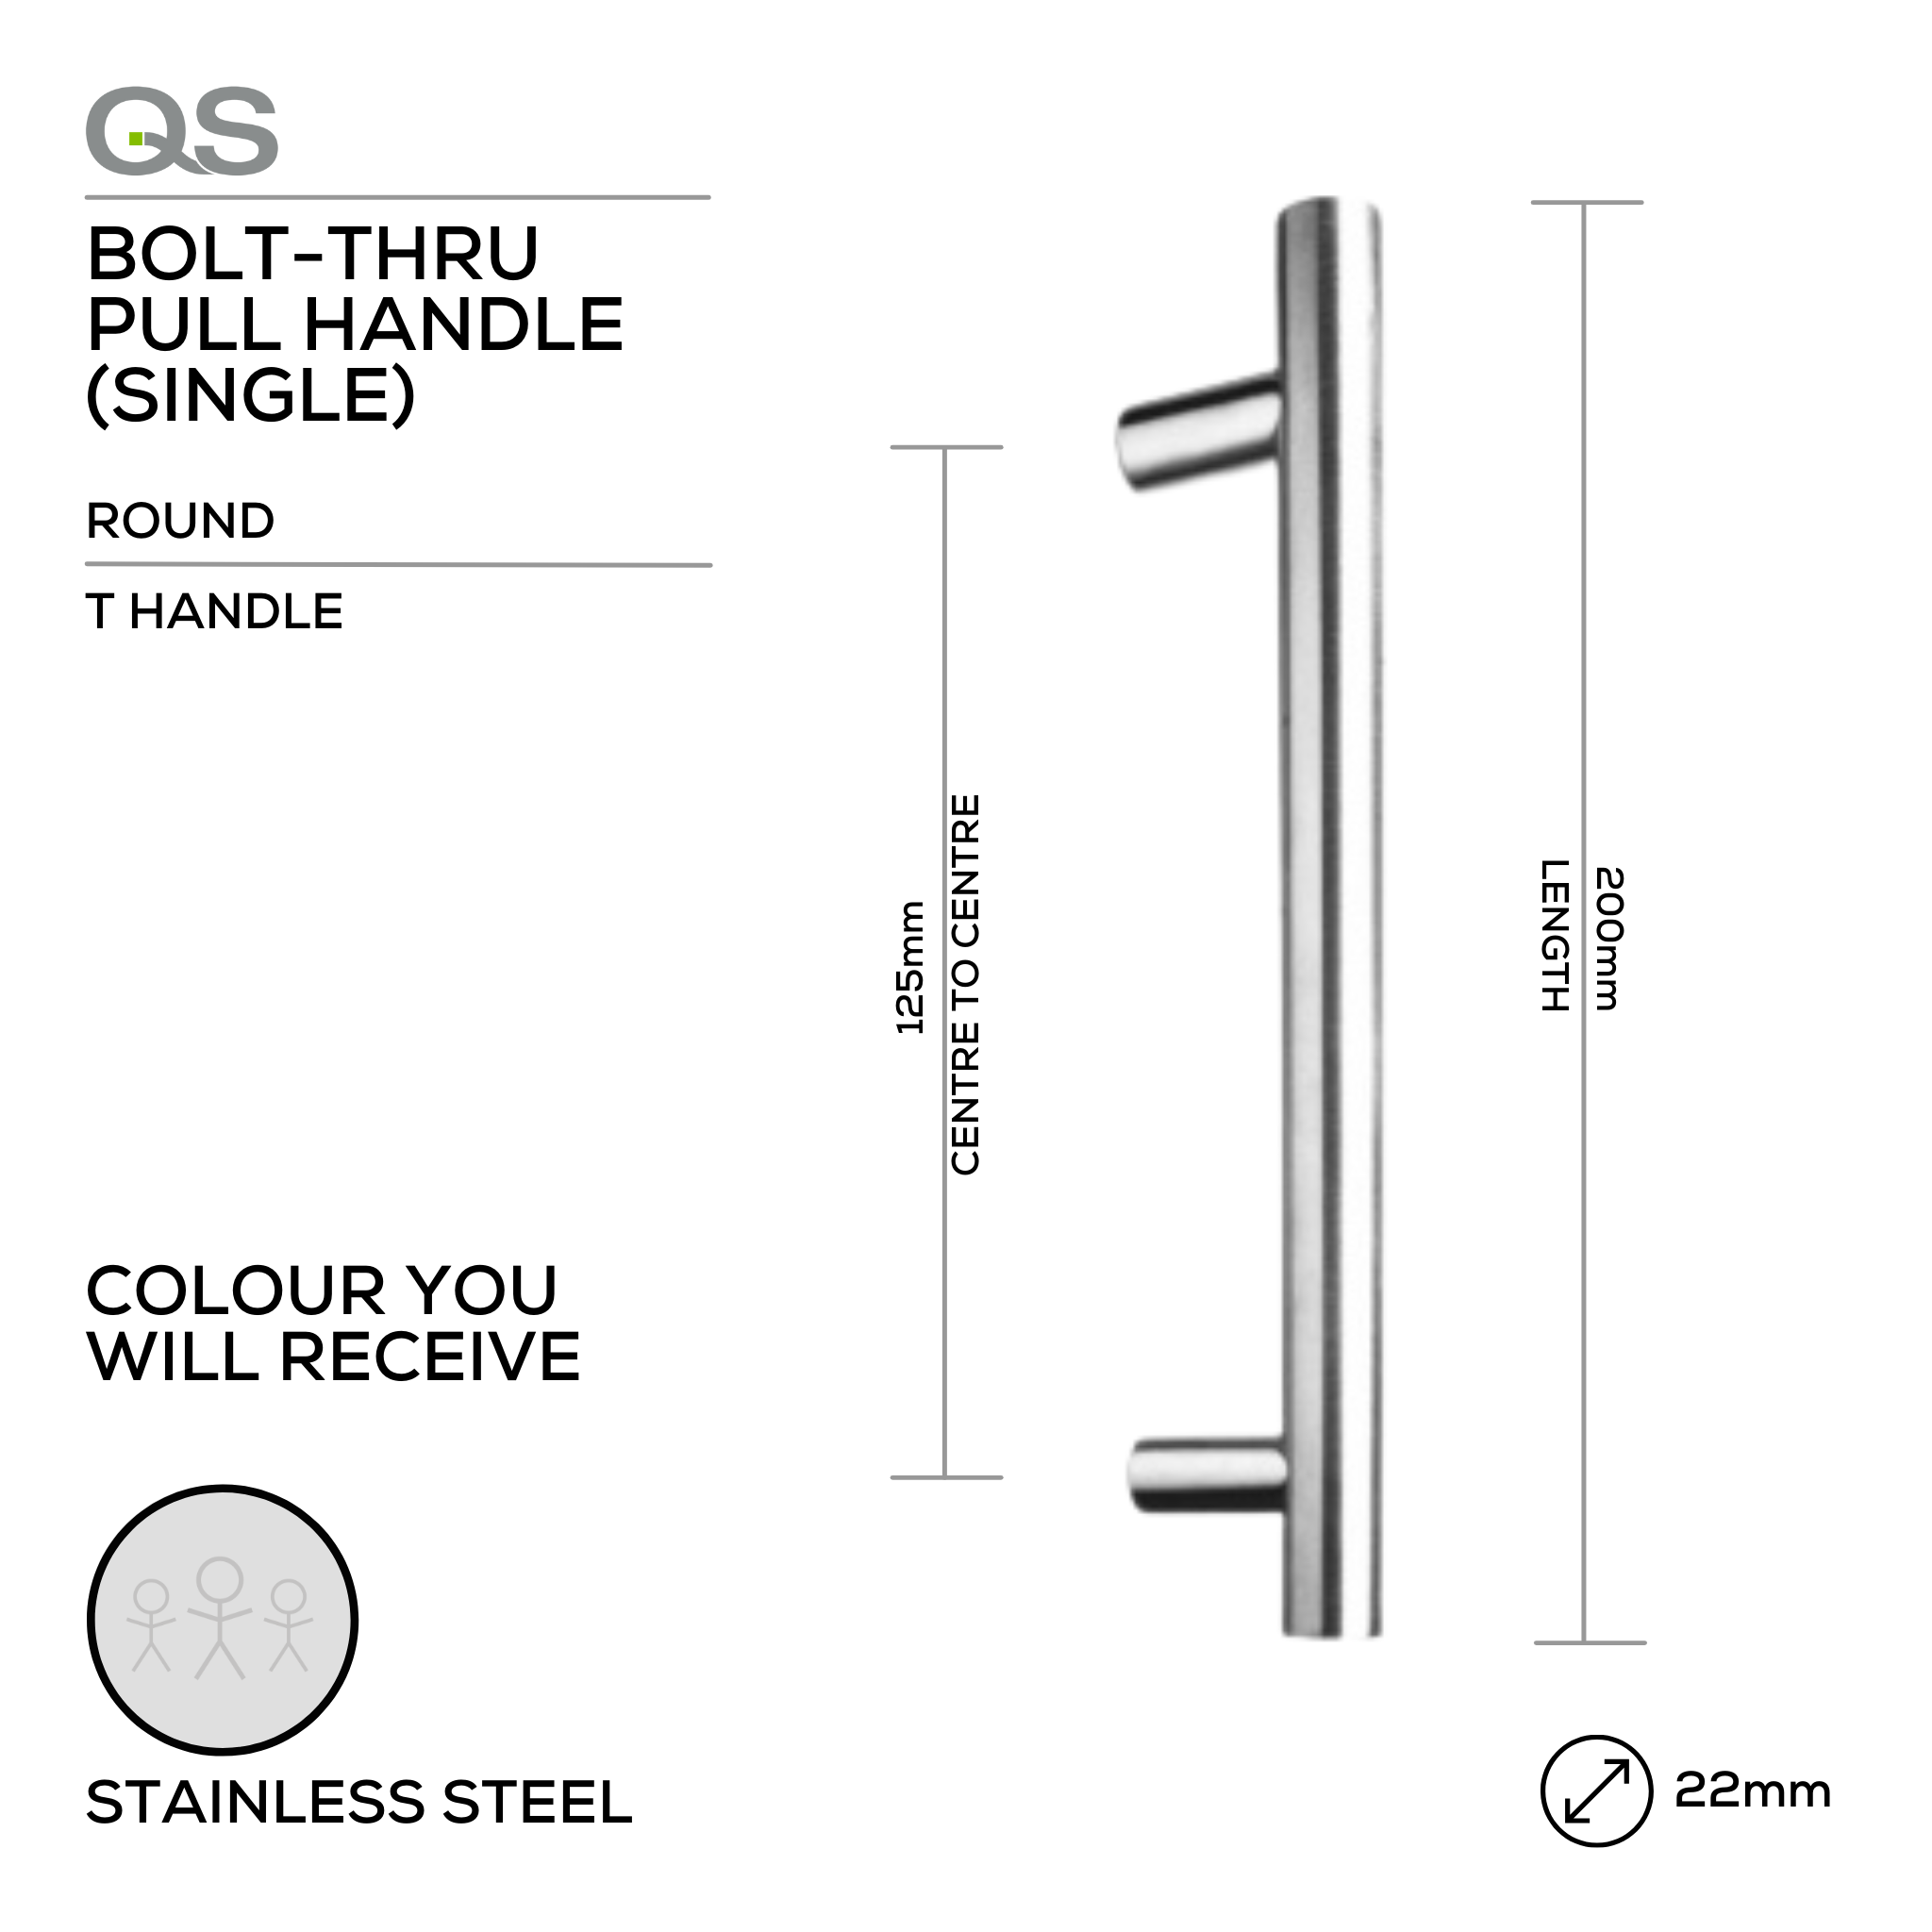 QS2503/1 T Handle, Pull Handle, Round, T Handle, BoltThru, 22mm (Ø) x 200mm (l) x 125mm (ctc), Stainless Steel, QS